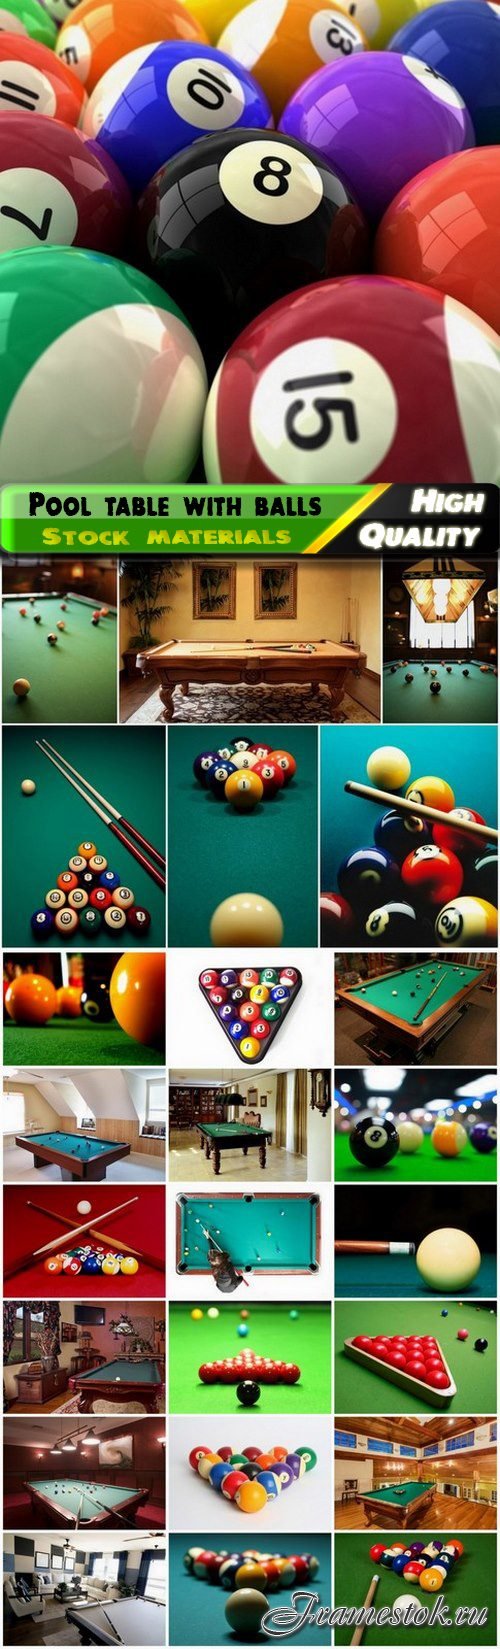 House interior with a pool table with balls and cue - 25 HQ Jpg